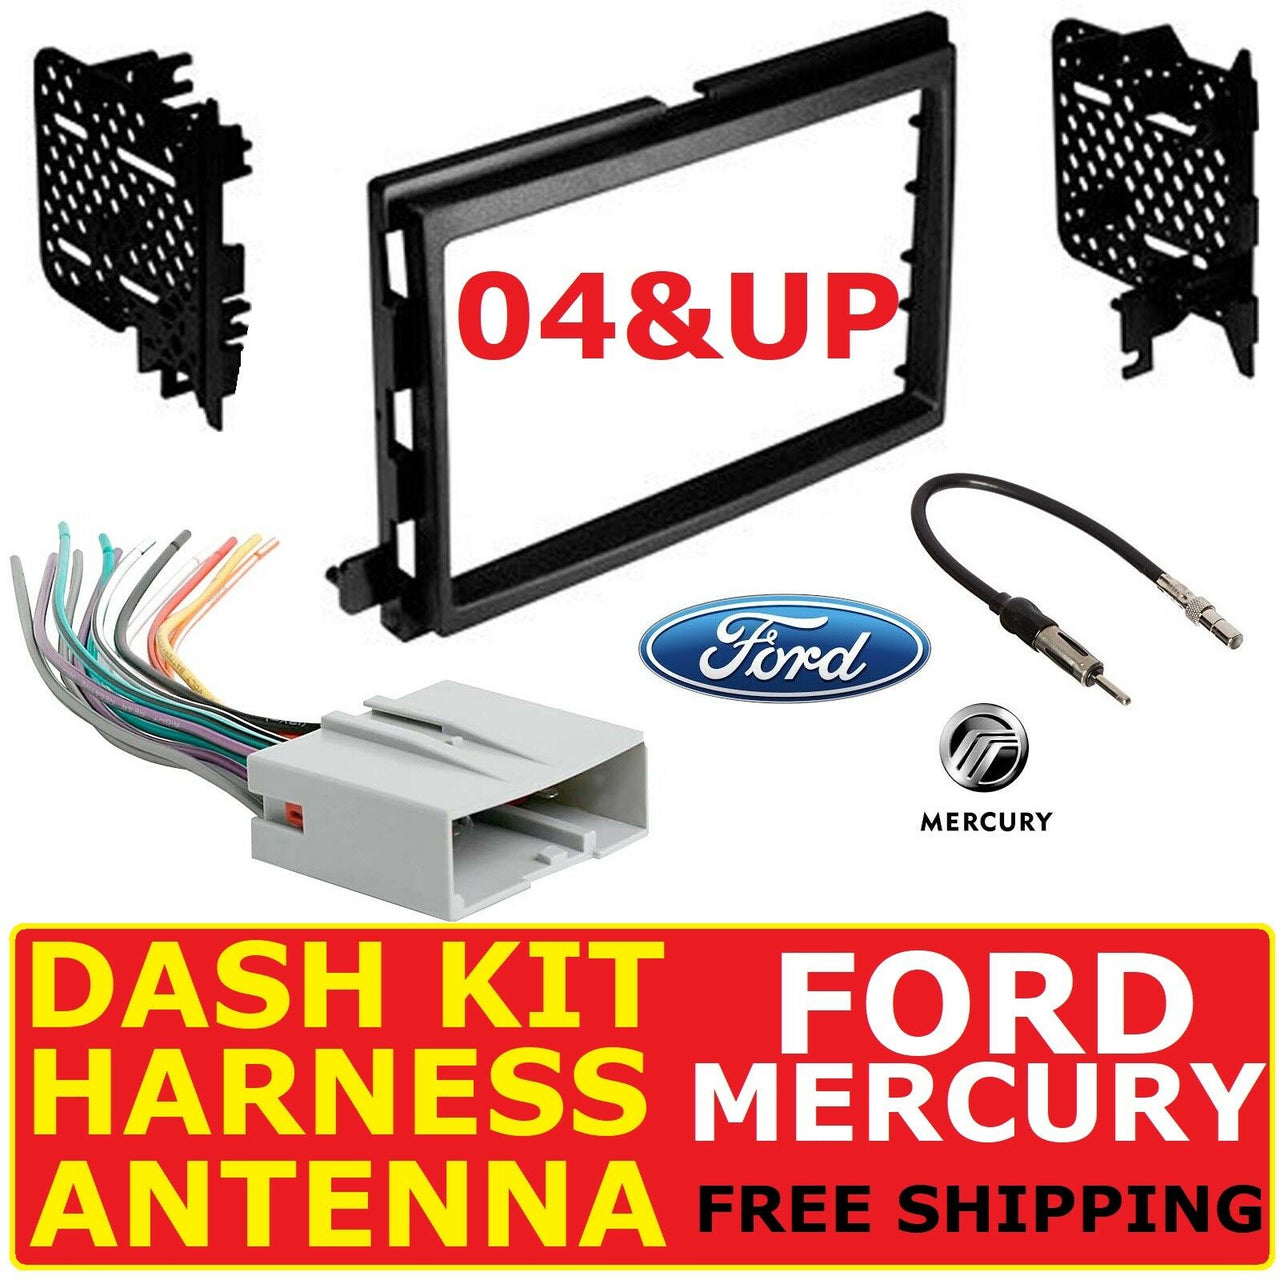 American International FMK552 Car Radio Stereo Double Din Dash Kit Harness Antenna Adapter for 1995-2011 Ford Lincoln Mazda Mercury